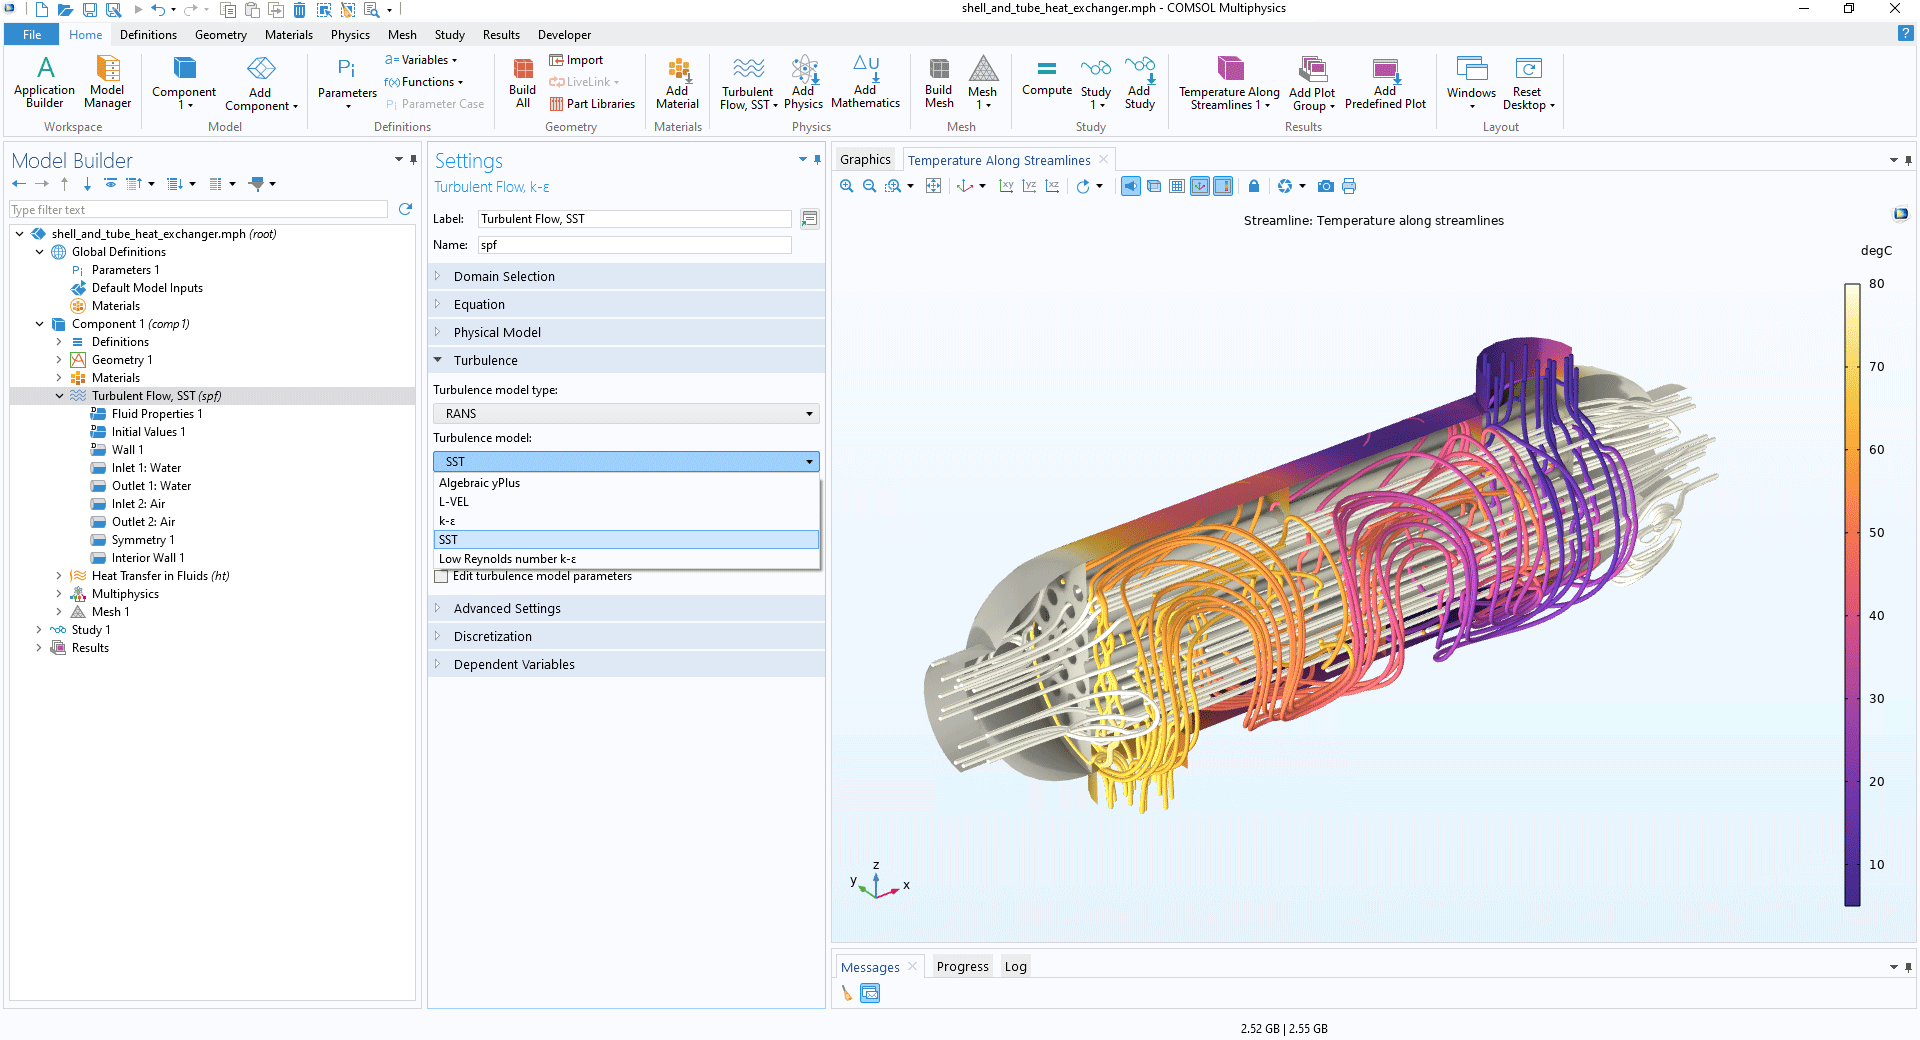 The COMSOL Multiphysics UI showing the Model Builder with the Turbulent Flow, SST interface node highlighted, the corresponding Settings window, and a heat exchanger model in the Graphics window.